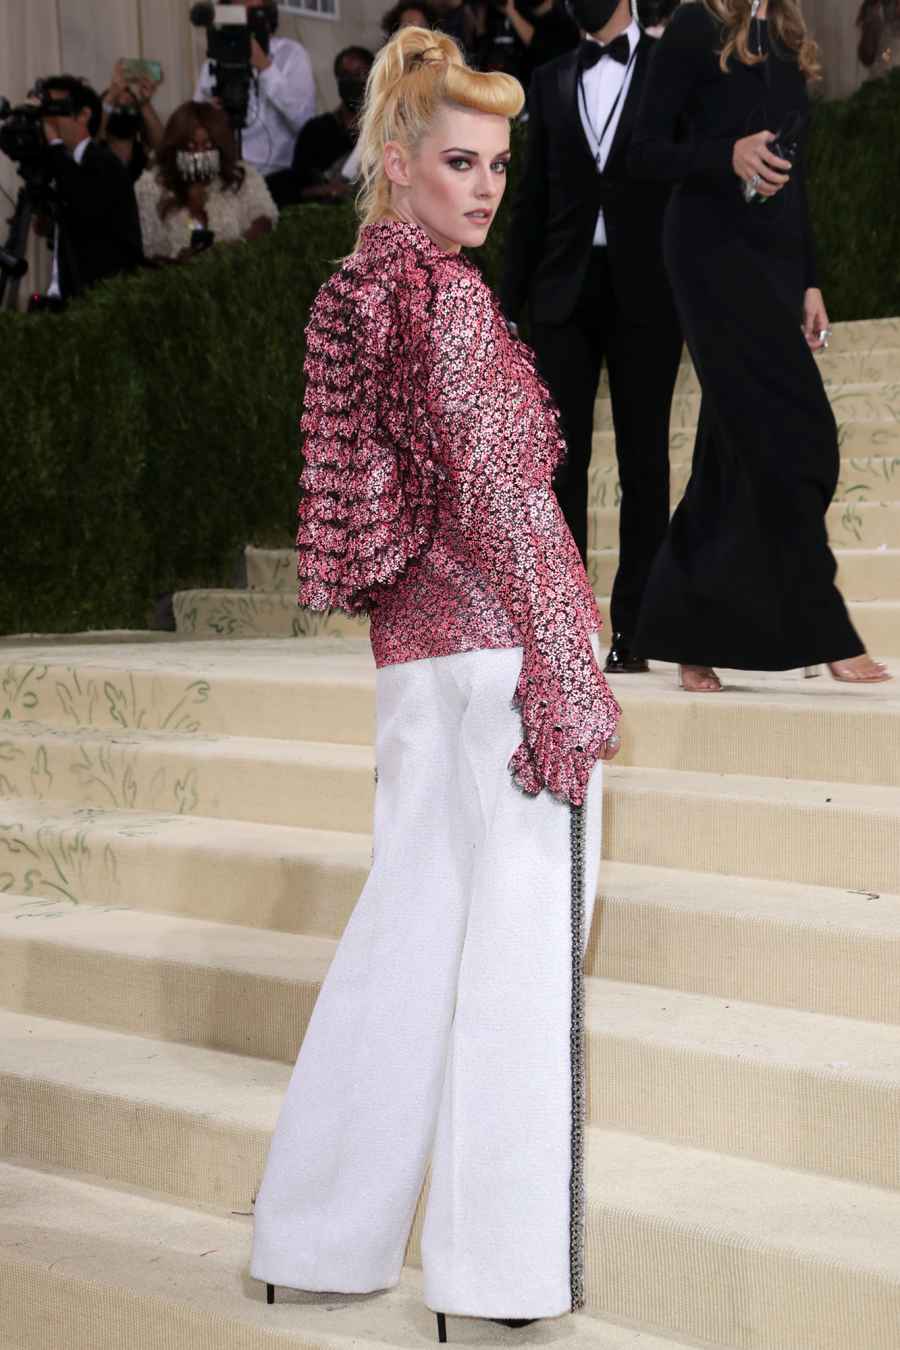 Pink! Peace Signs! Kristen Stewart Serves Up All the Retro Vibes at the 2021 Met Gala